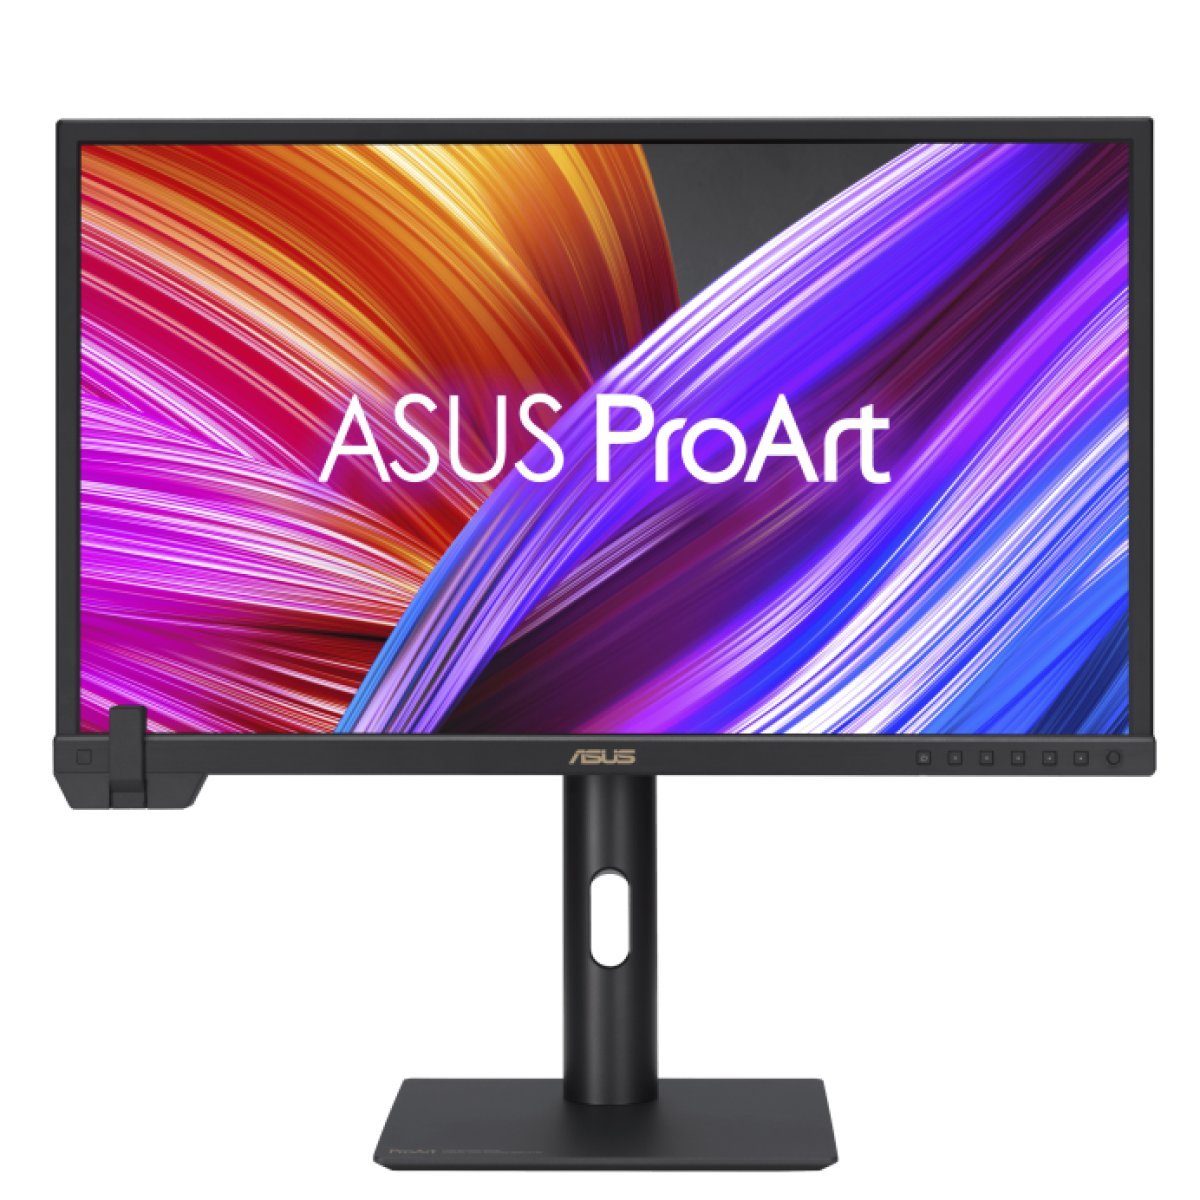 Asus PA32UCXR LCD-Monitor (81.3 cm/32 ", 5 ms Reaktionszeit, 60 Hz, LCD)